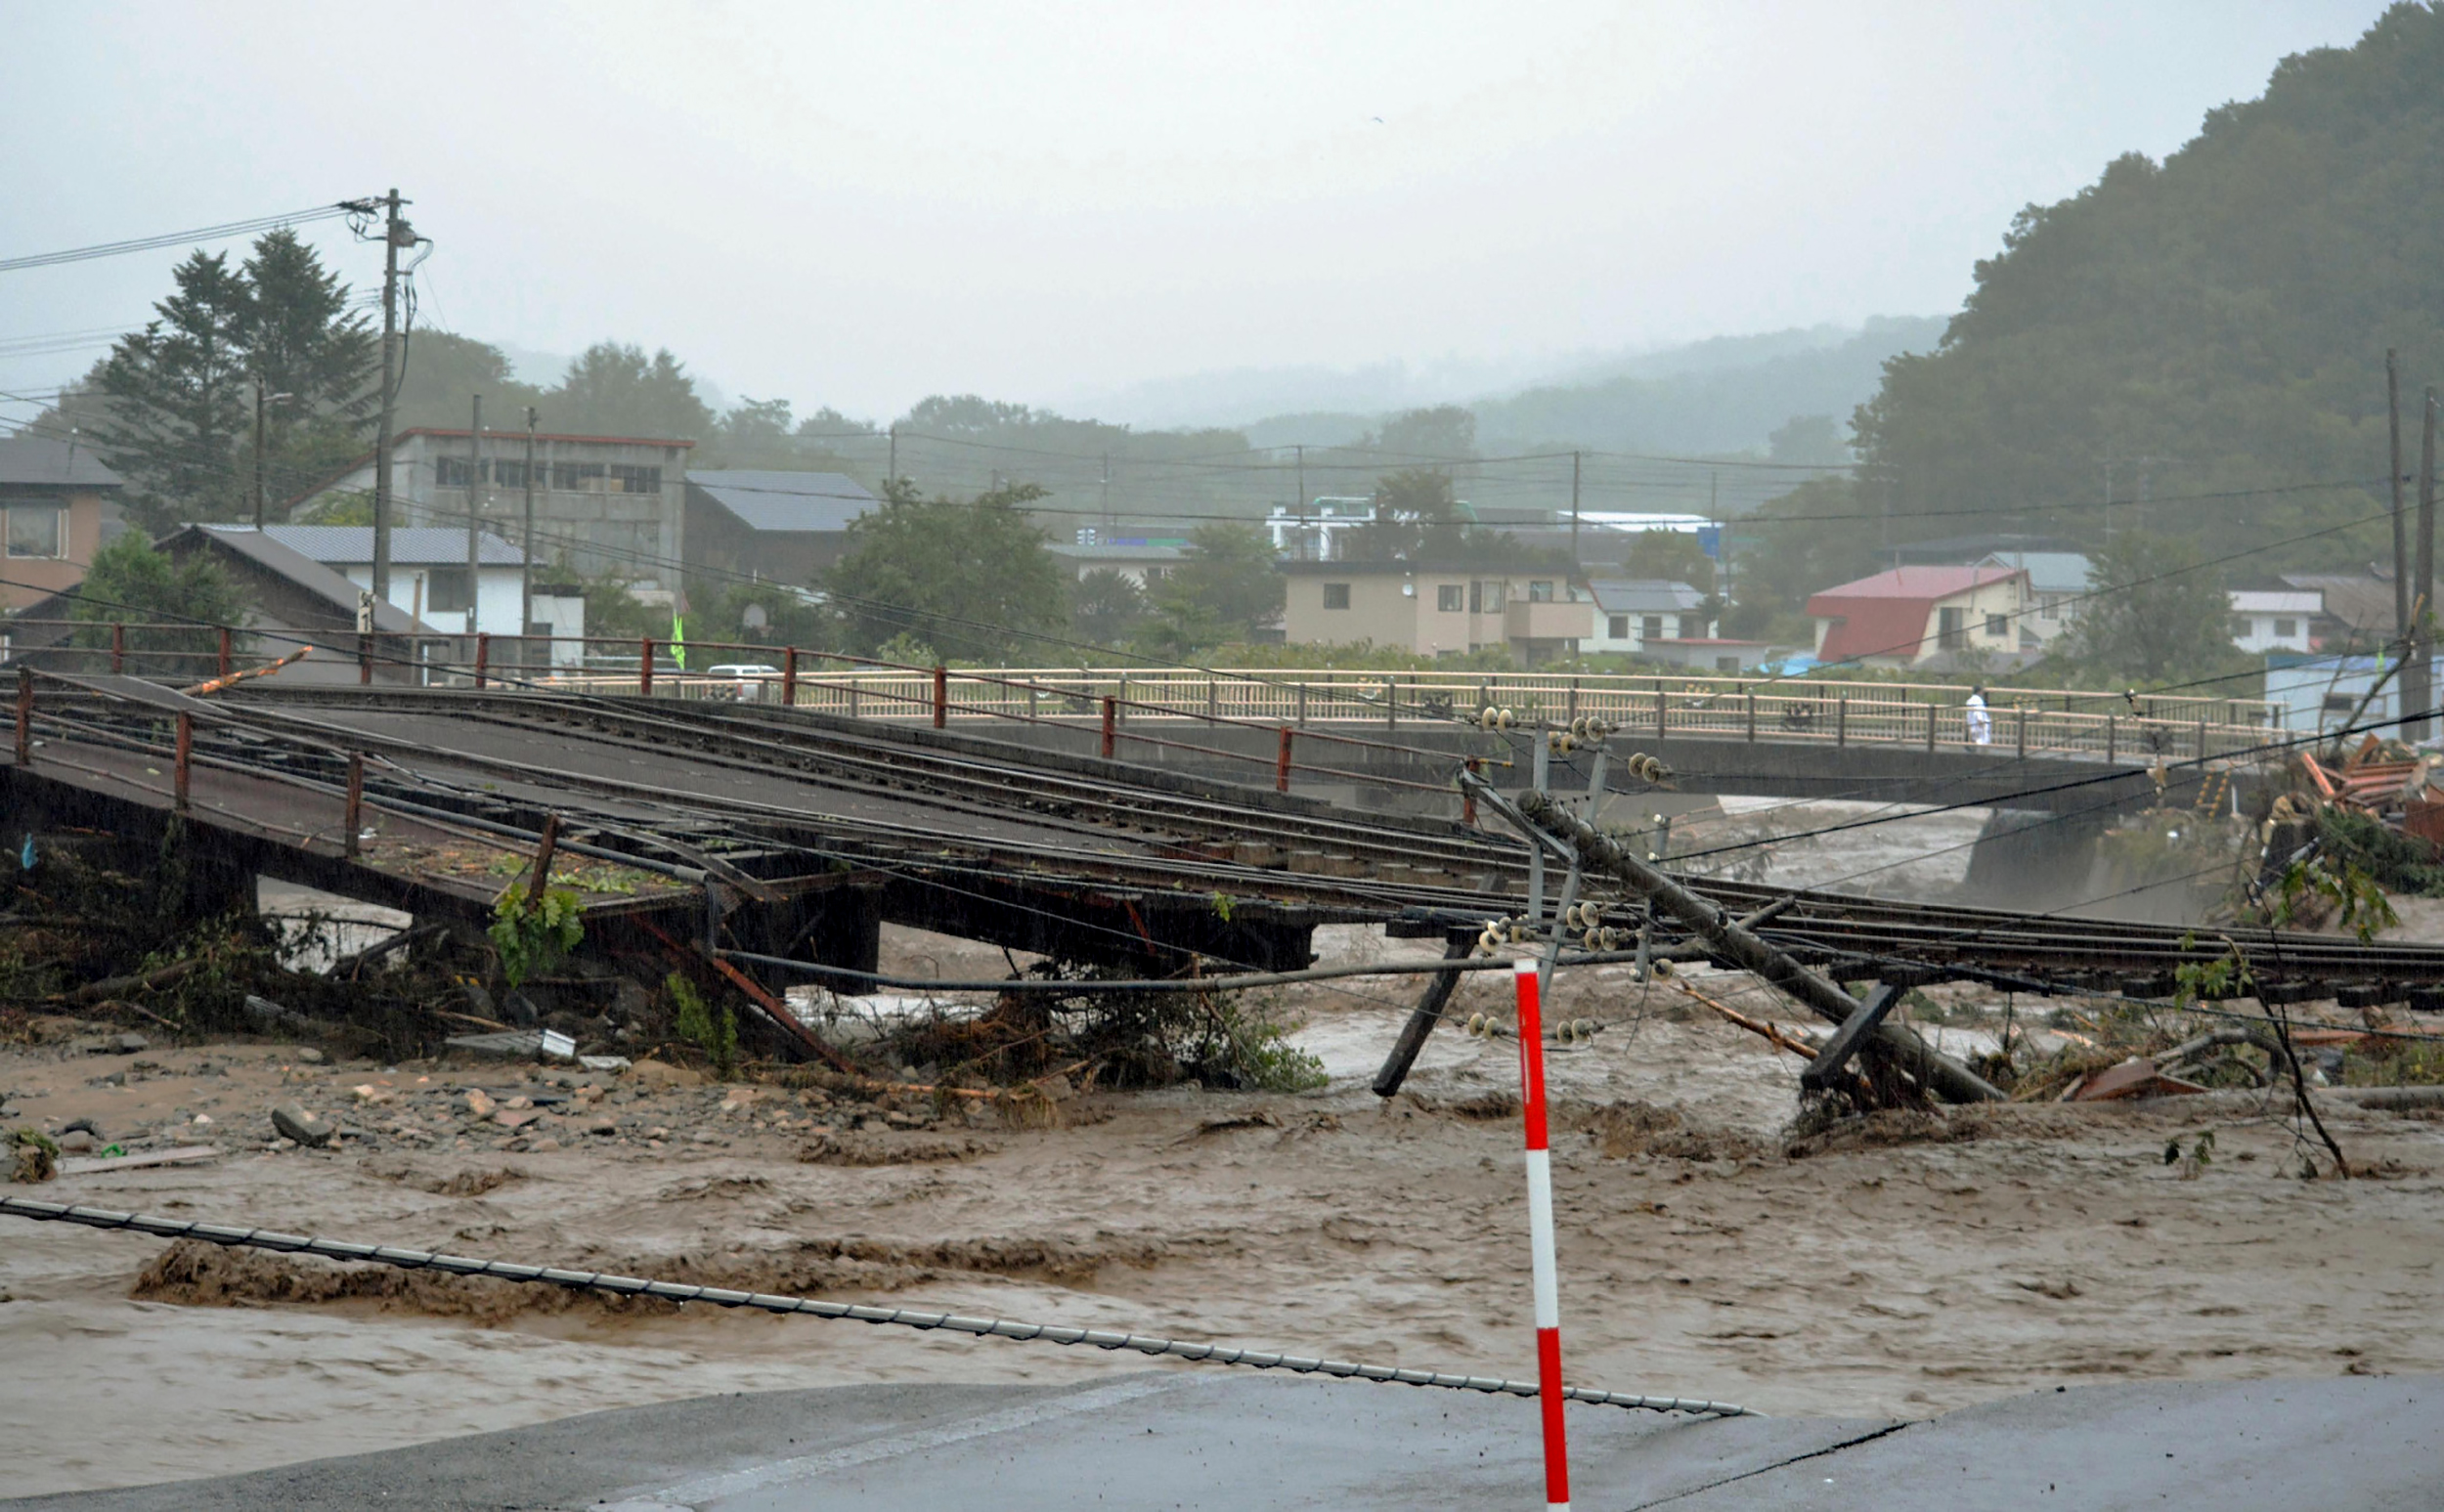 This picture provided by Tokachi Mainichi Newspaper via Jiji Press on August 31, 2016 shows a damaged railroad from flooding in the town of Shintoku in Hokkaido prefecture, after Typhoon Lionrock struck overnight. Ten people were found dead in northern Japan -- nine inside a inside a home for elderly -- people in northern Japan, authorities said August 31, after a powerful typhoon tore through the region. / AFP PHOTO / JIJI PRESS / Tokachi Mainichi / Japan OUT